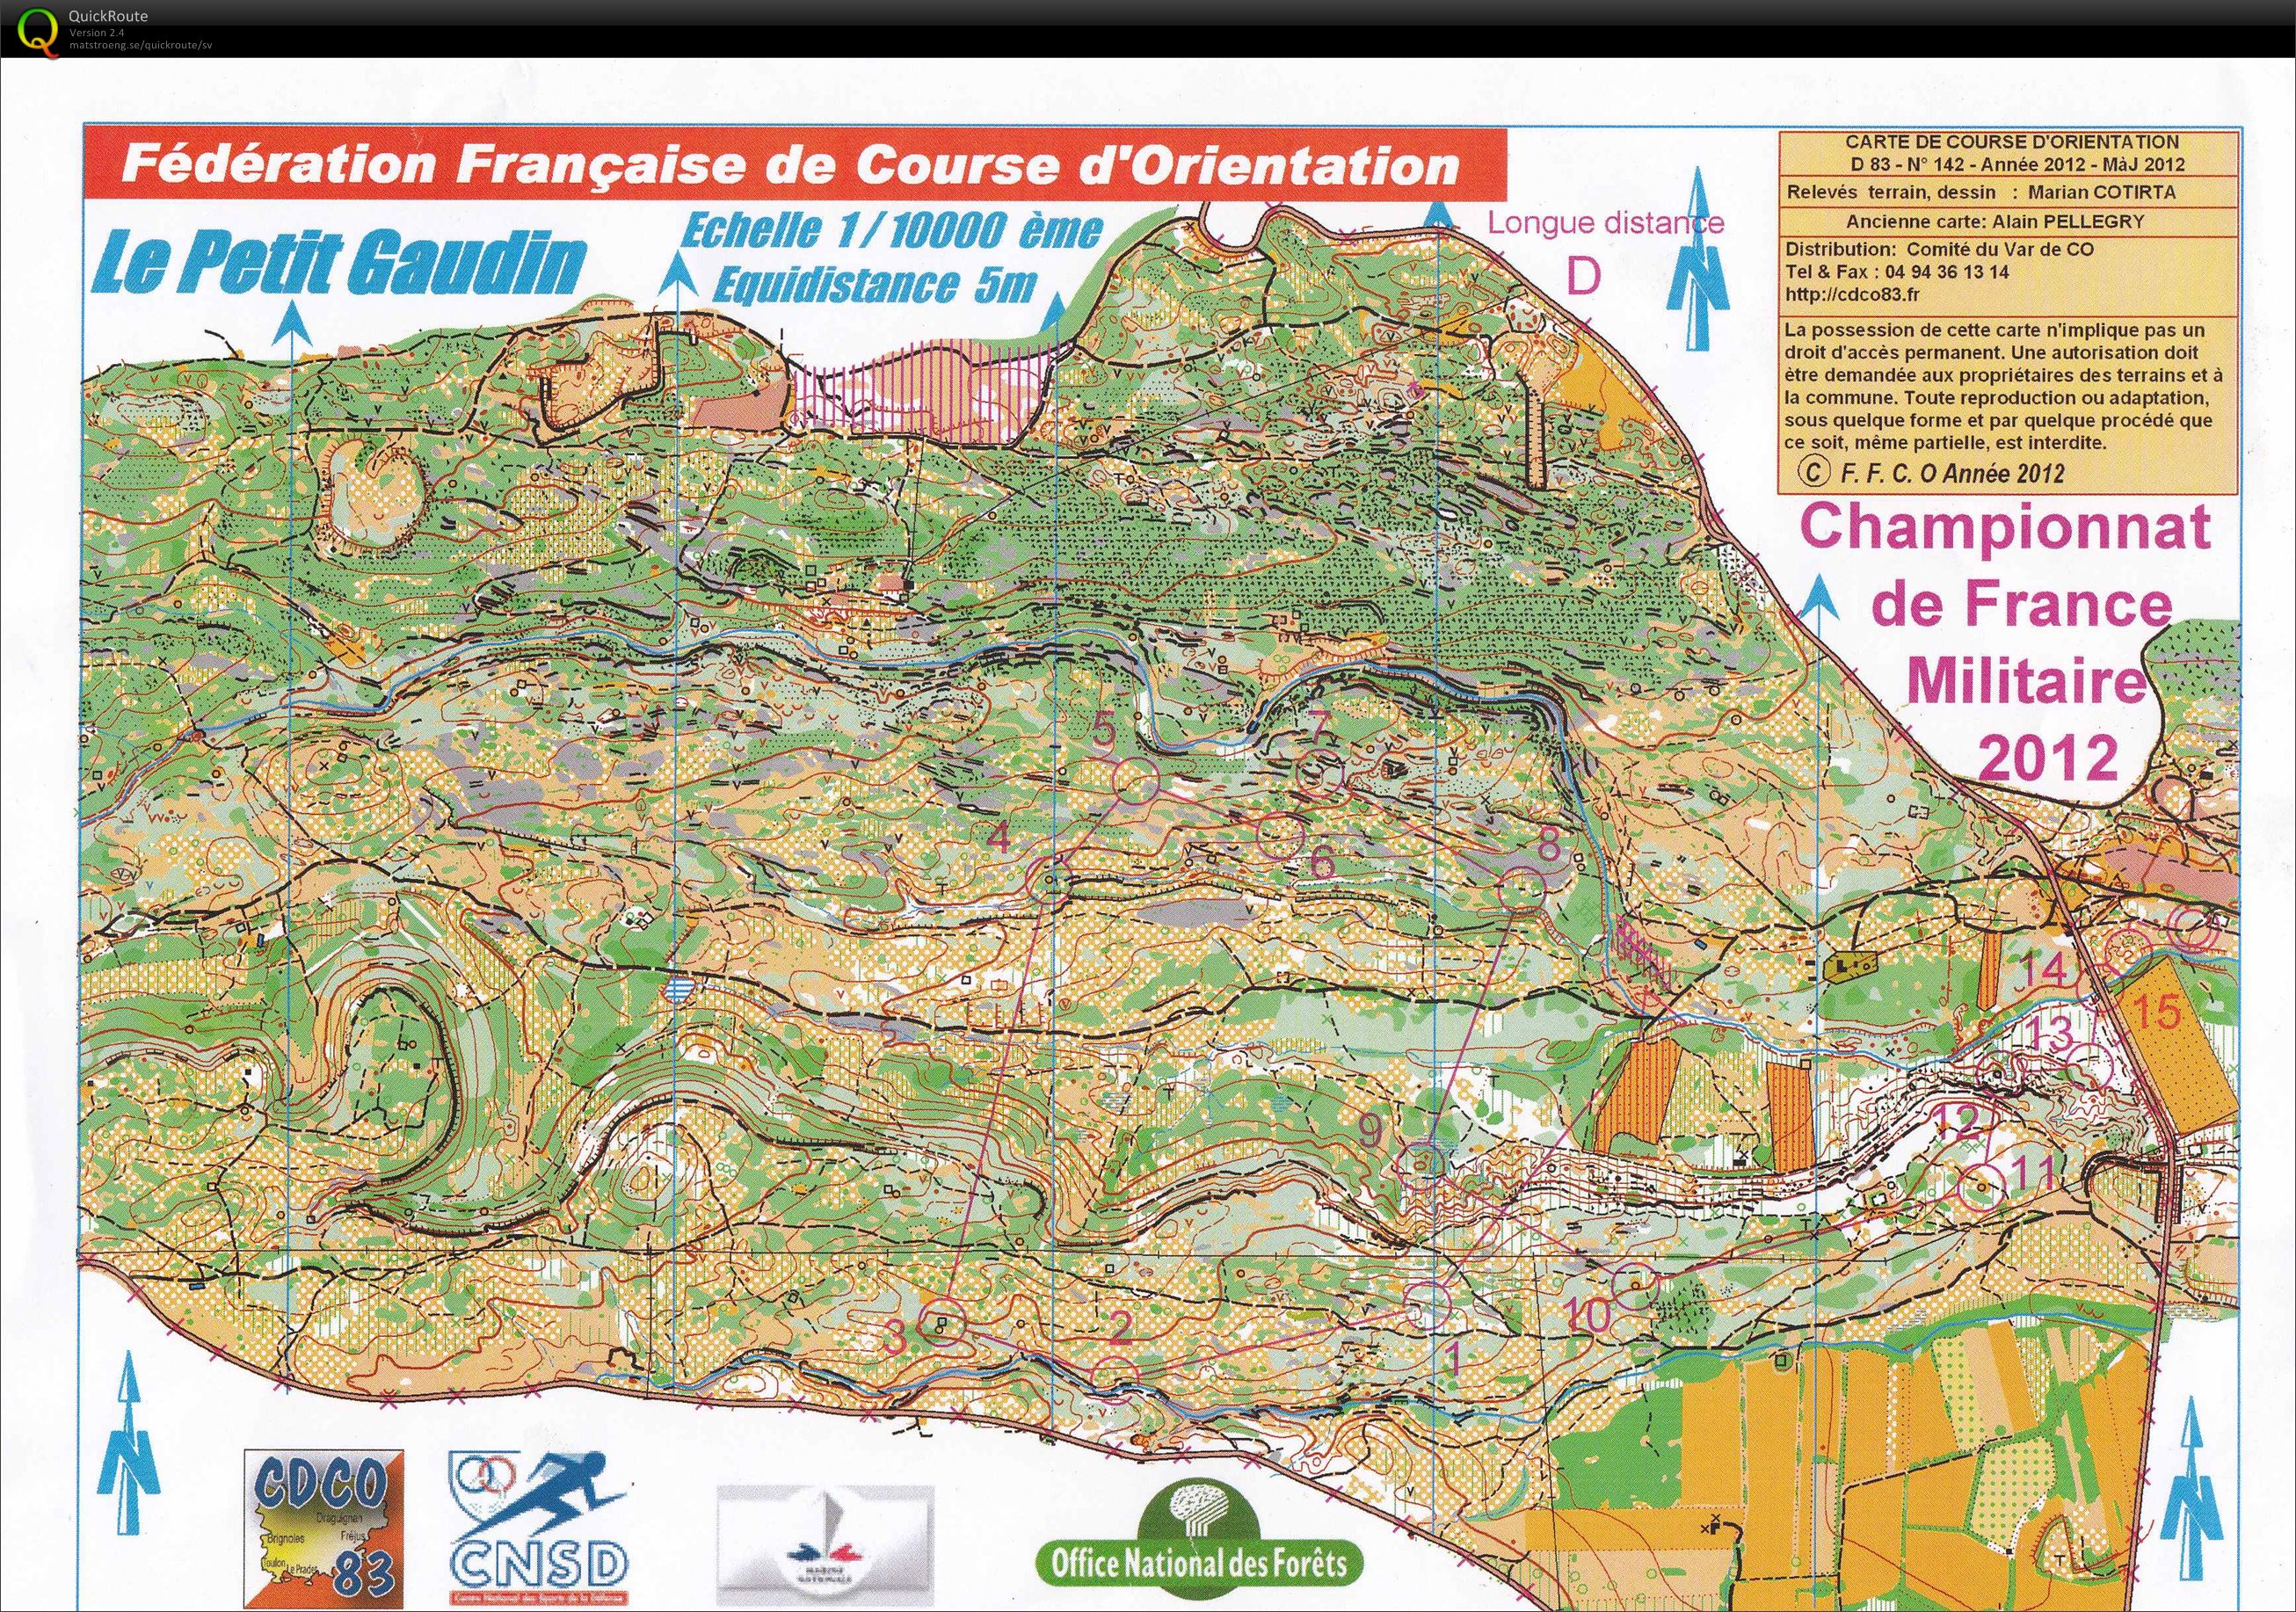 Open race after French Military long dist champ H60 (11/05/2012)